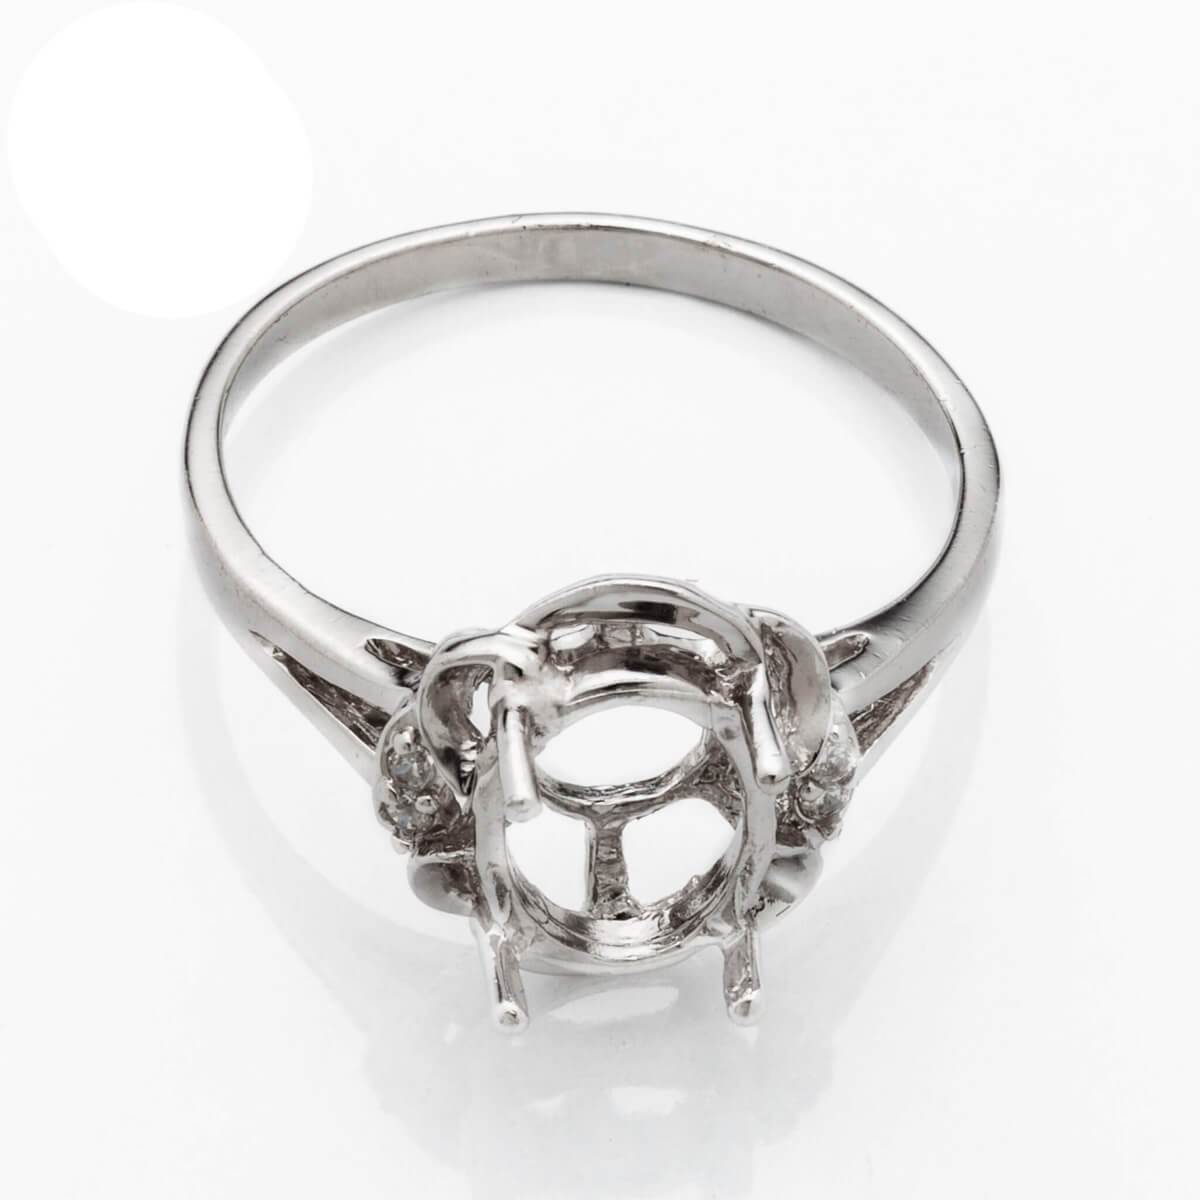 Ring with Side Cubic Zirconia Inlays and Oval Prongs Mounting in Sterling Silver 7x9mm 